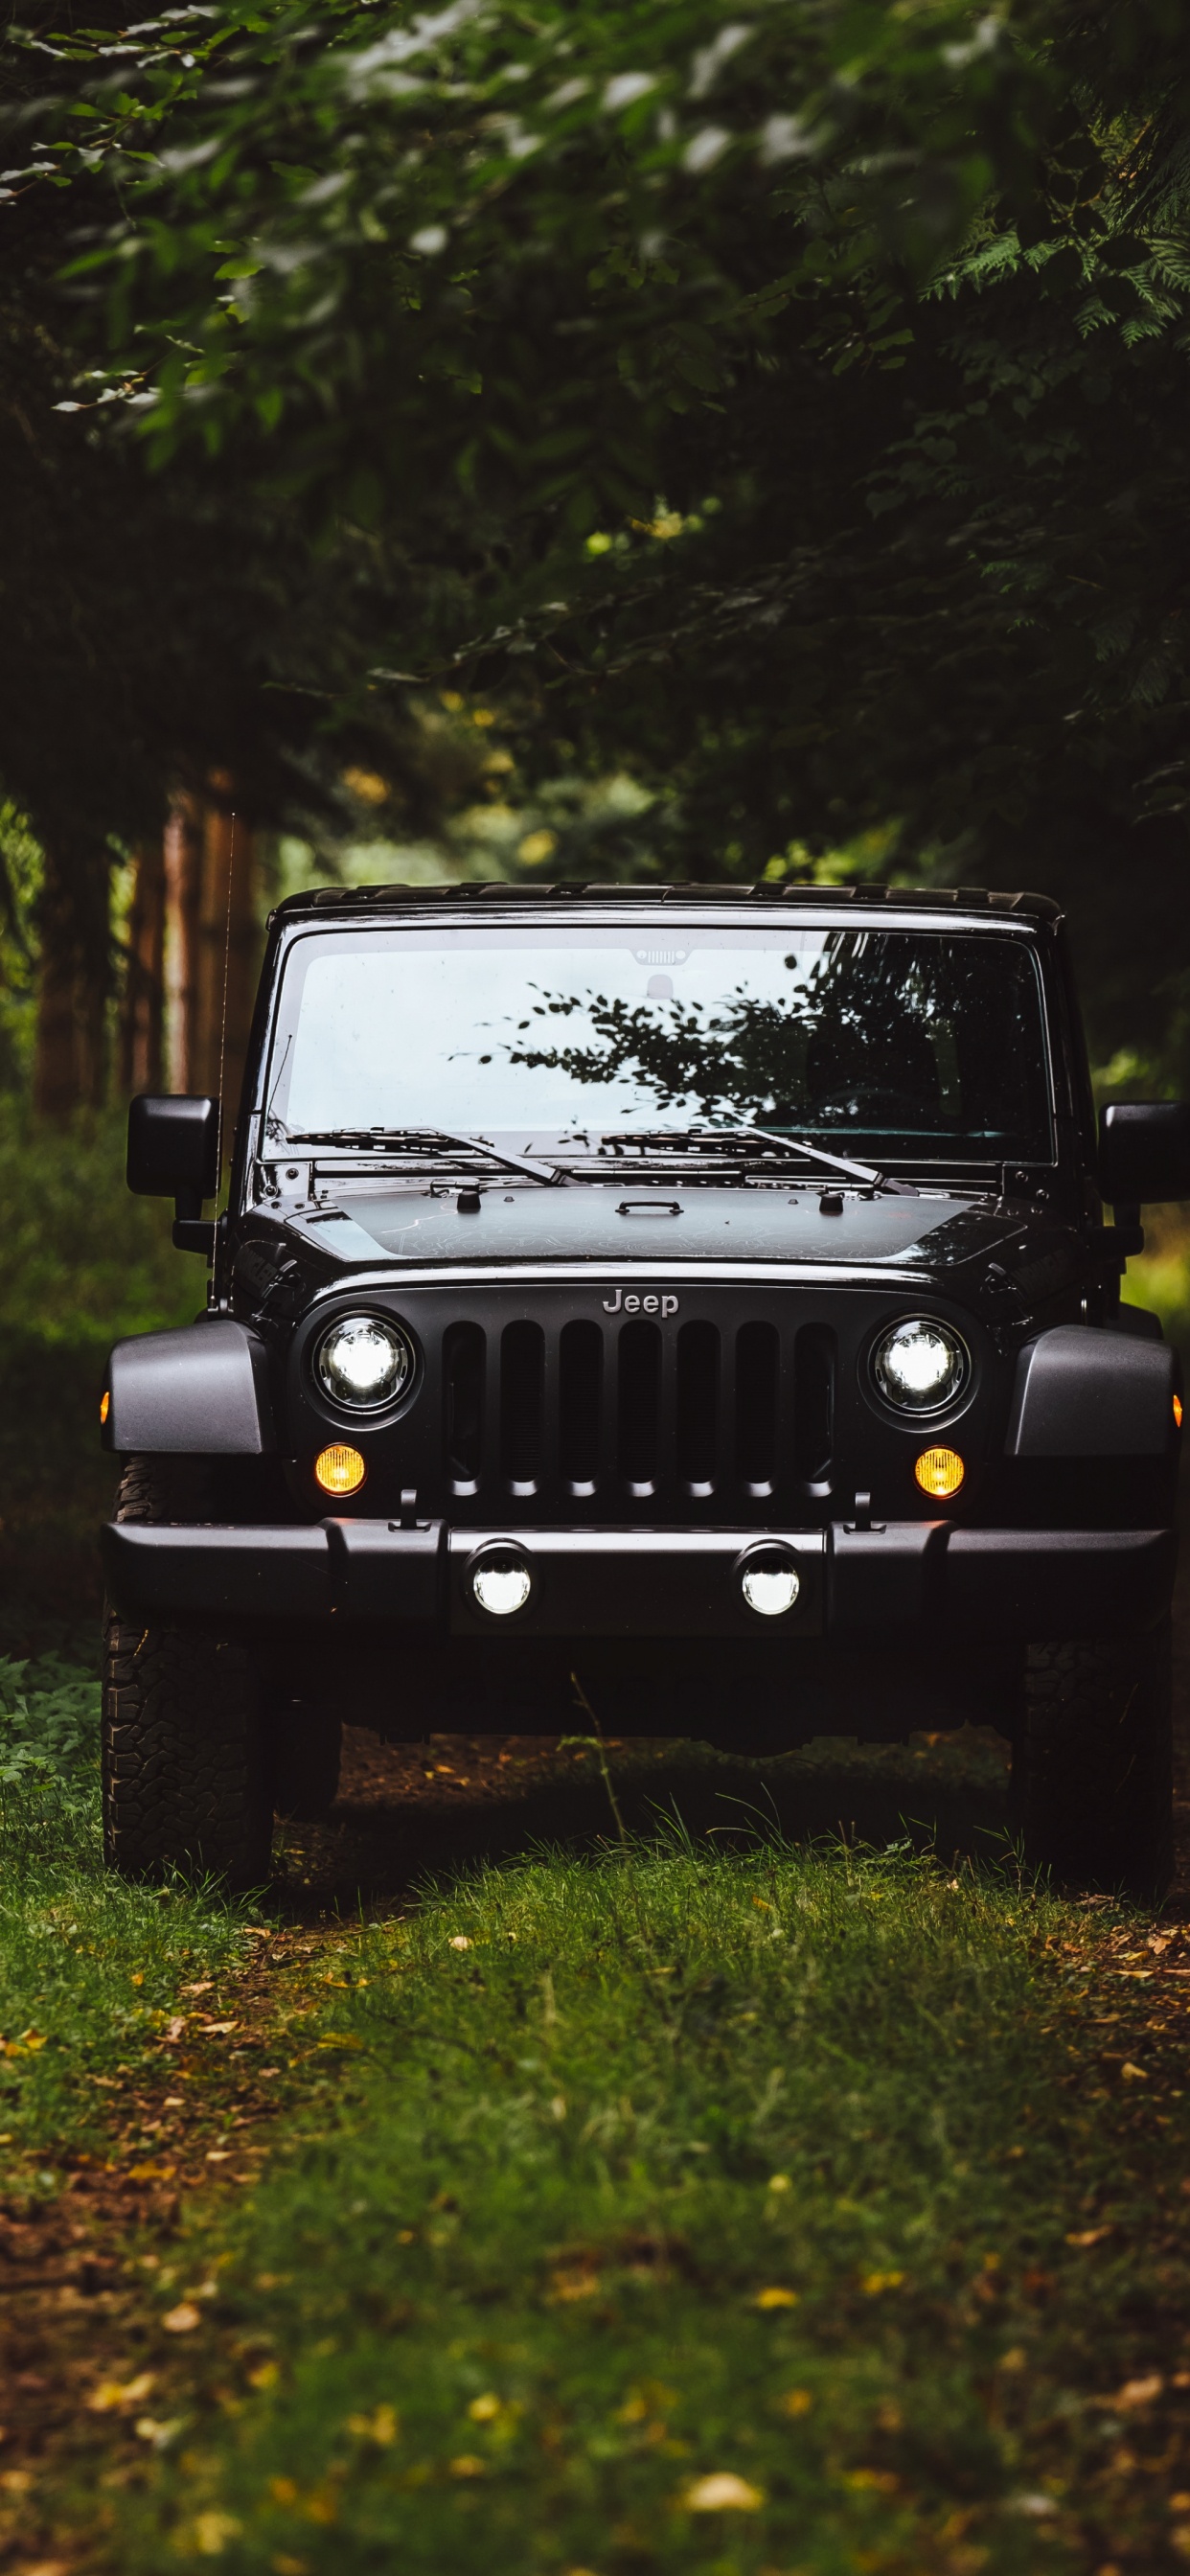 Black Jeep Wrangler on Green Grass Field Surrounded by Green Trees During Daytime. Wallpaper in 1242x2688 Resolution